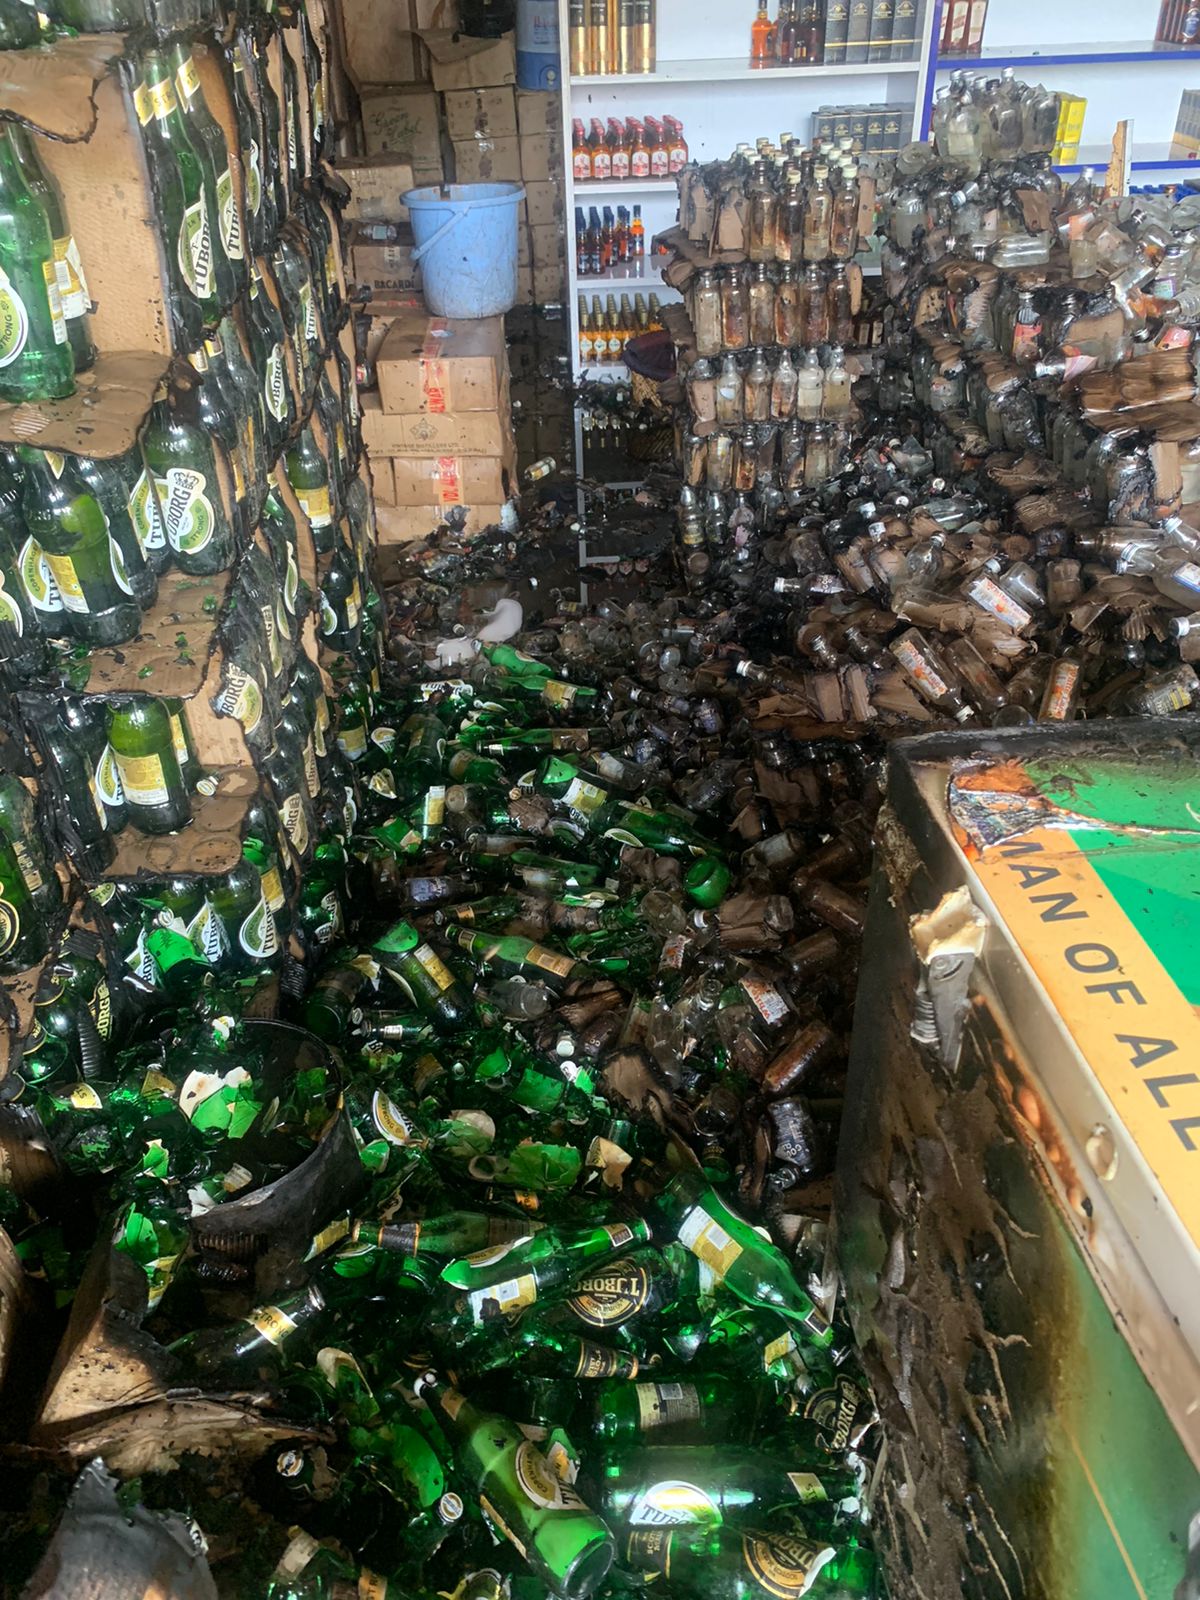 liquor-worth-thousands-destroyed-due-to-fire-in-liquor-shop-due-to-short-circuit